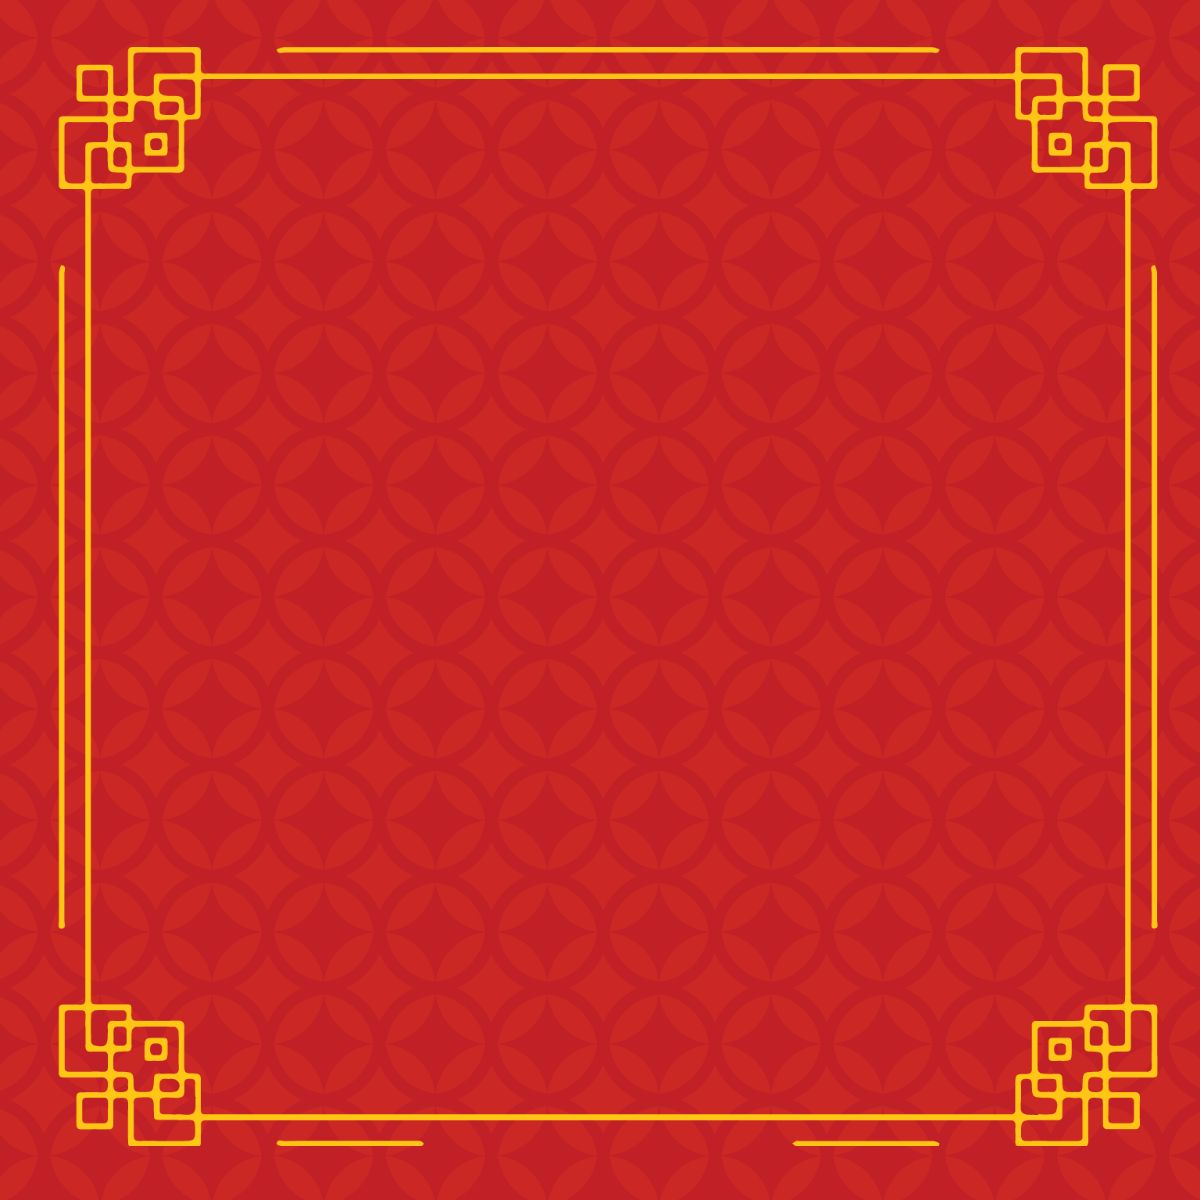 Chinese New Year Frame Vector